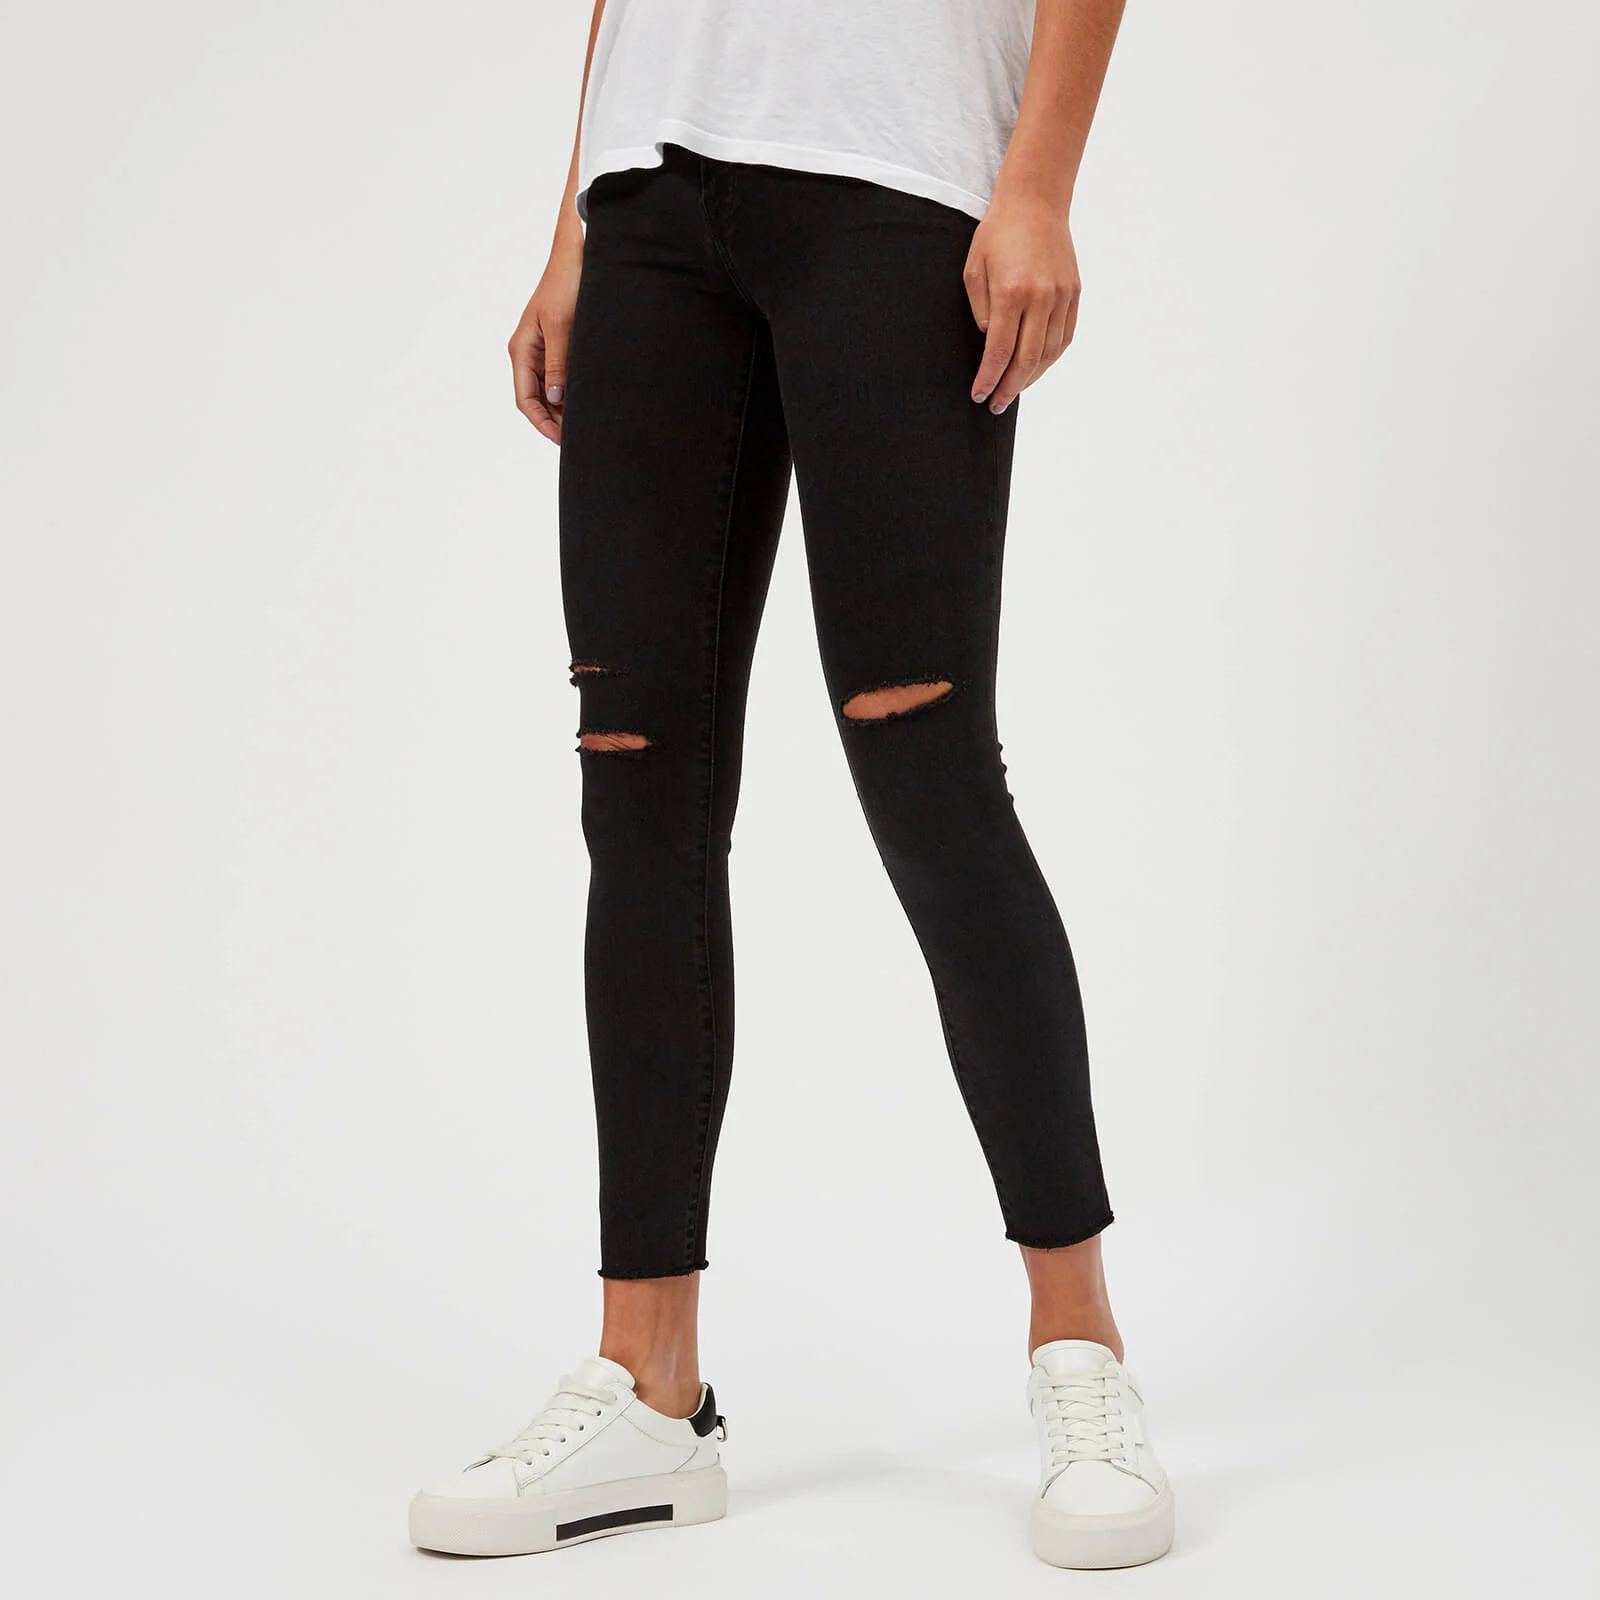 J Brand Women's 8227 Mid Rise Cropped Skinny Jeans - Black Mercy Image 1